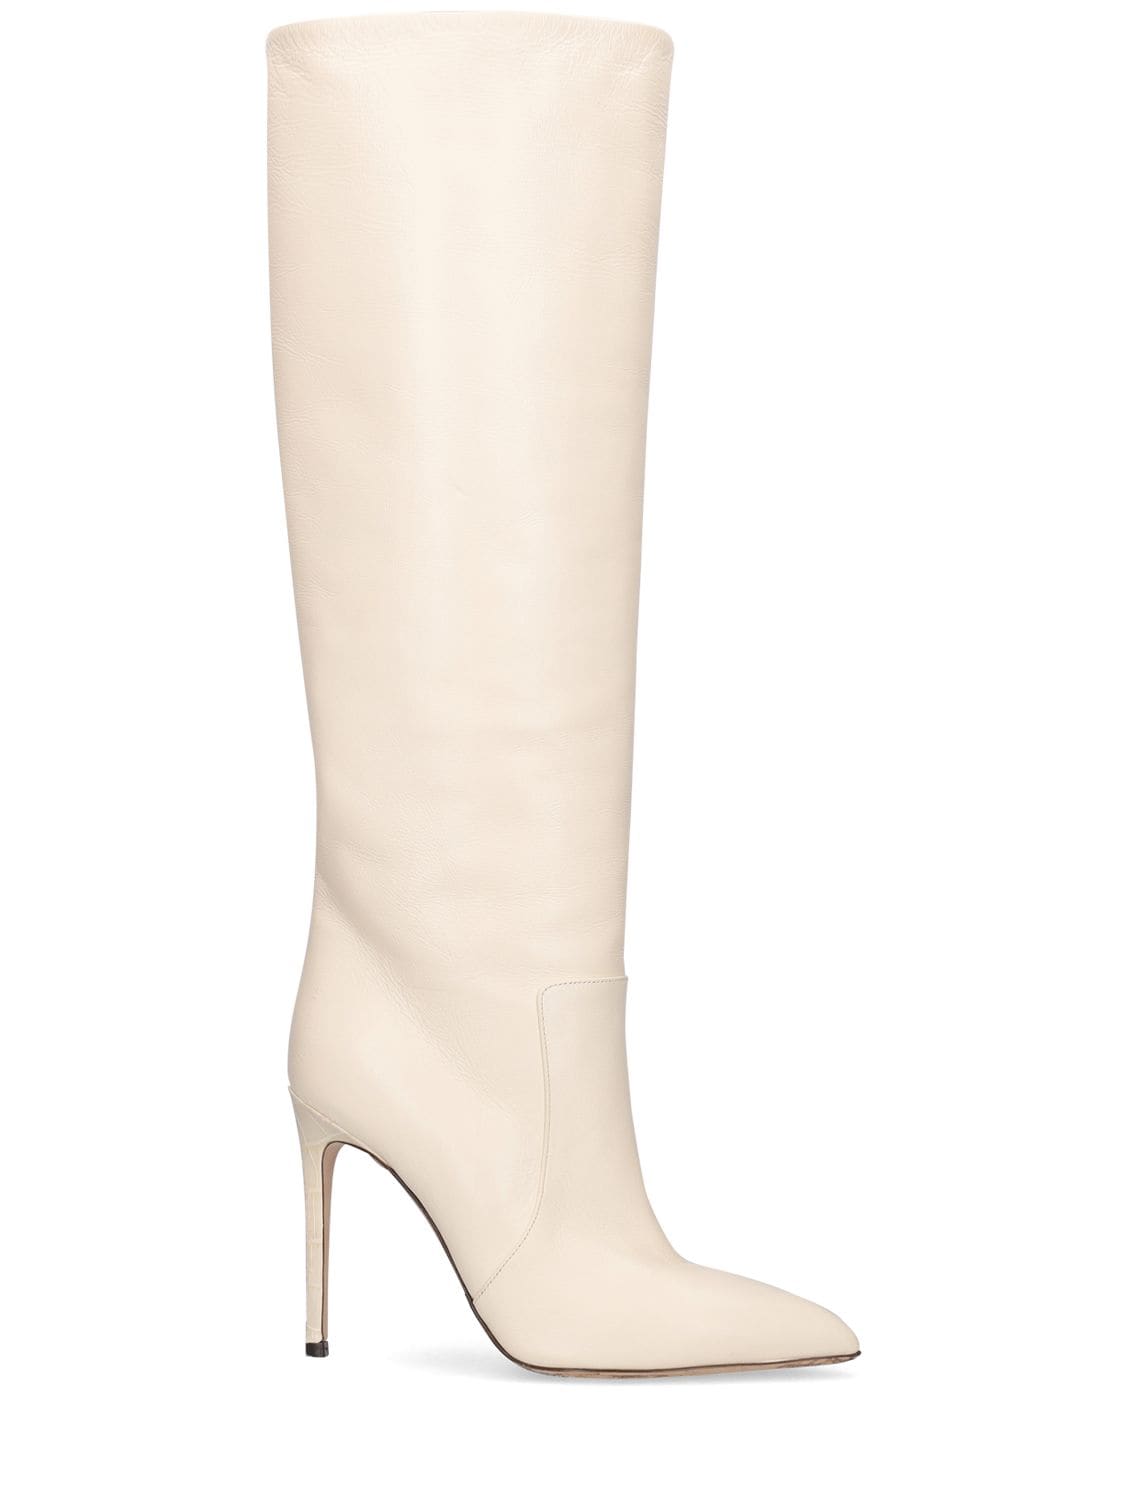 Paris Texas 105mm Stiletto Patent Leather Tall Boots In White | ModeSens